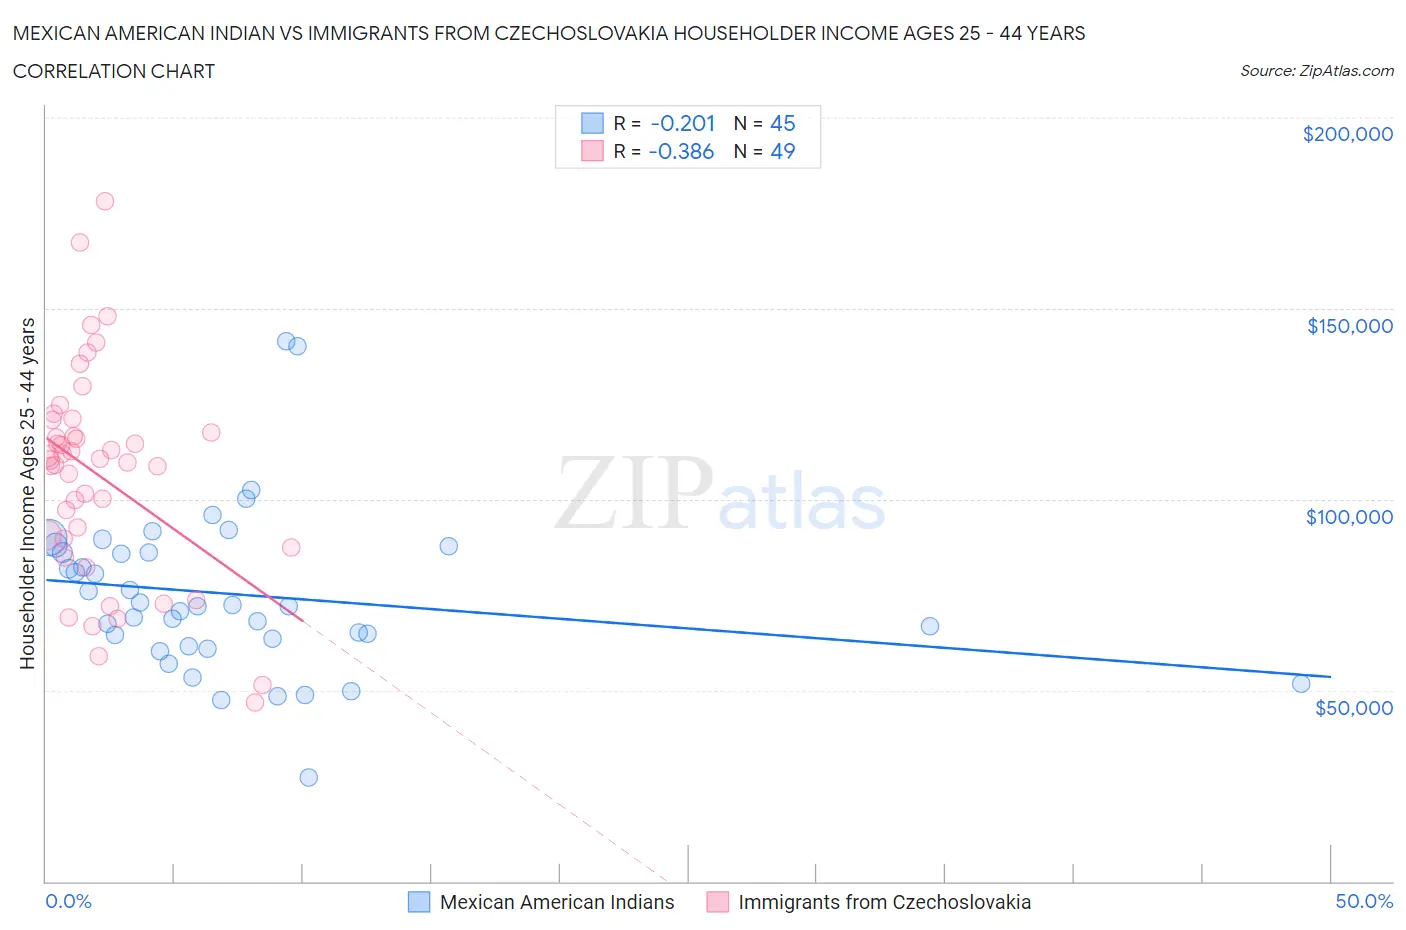 Mexican American Indian vs Immigrants from Czechoslovakia Householder Income Ages 25 - 44 years